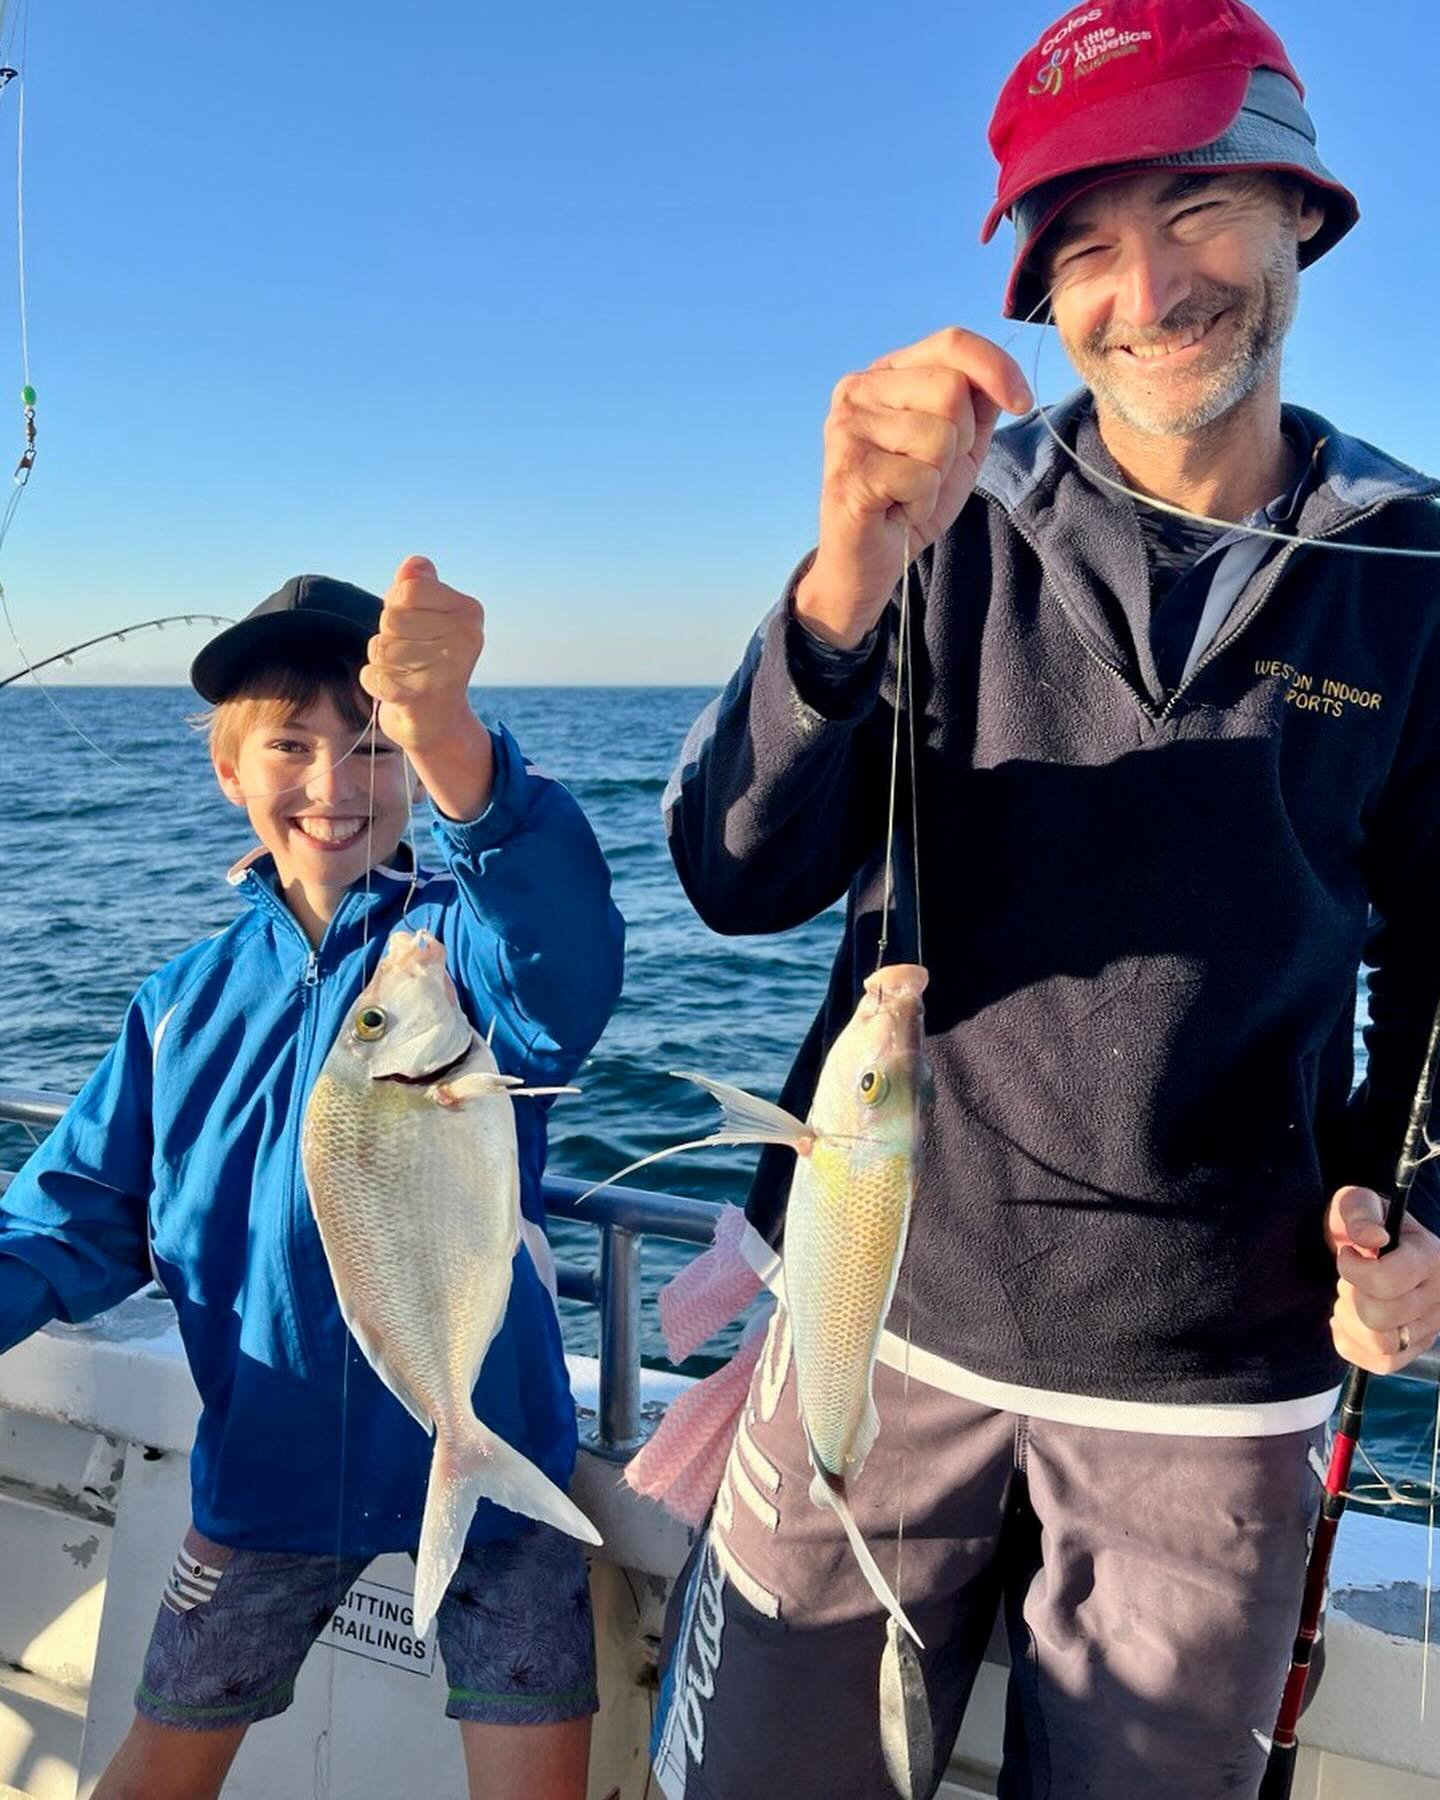 Looking for a school holiday adventure? Join us for a family-friendly fishing trip and &ldquo;reel&rdquo; in some quality time together! Book now and let&rsquo;s make some waves! 🎣💪